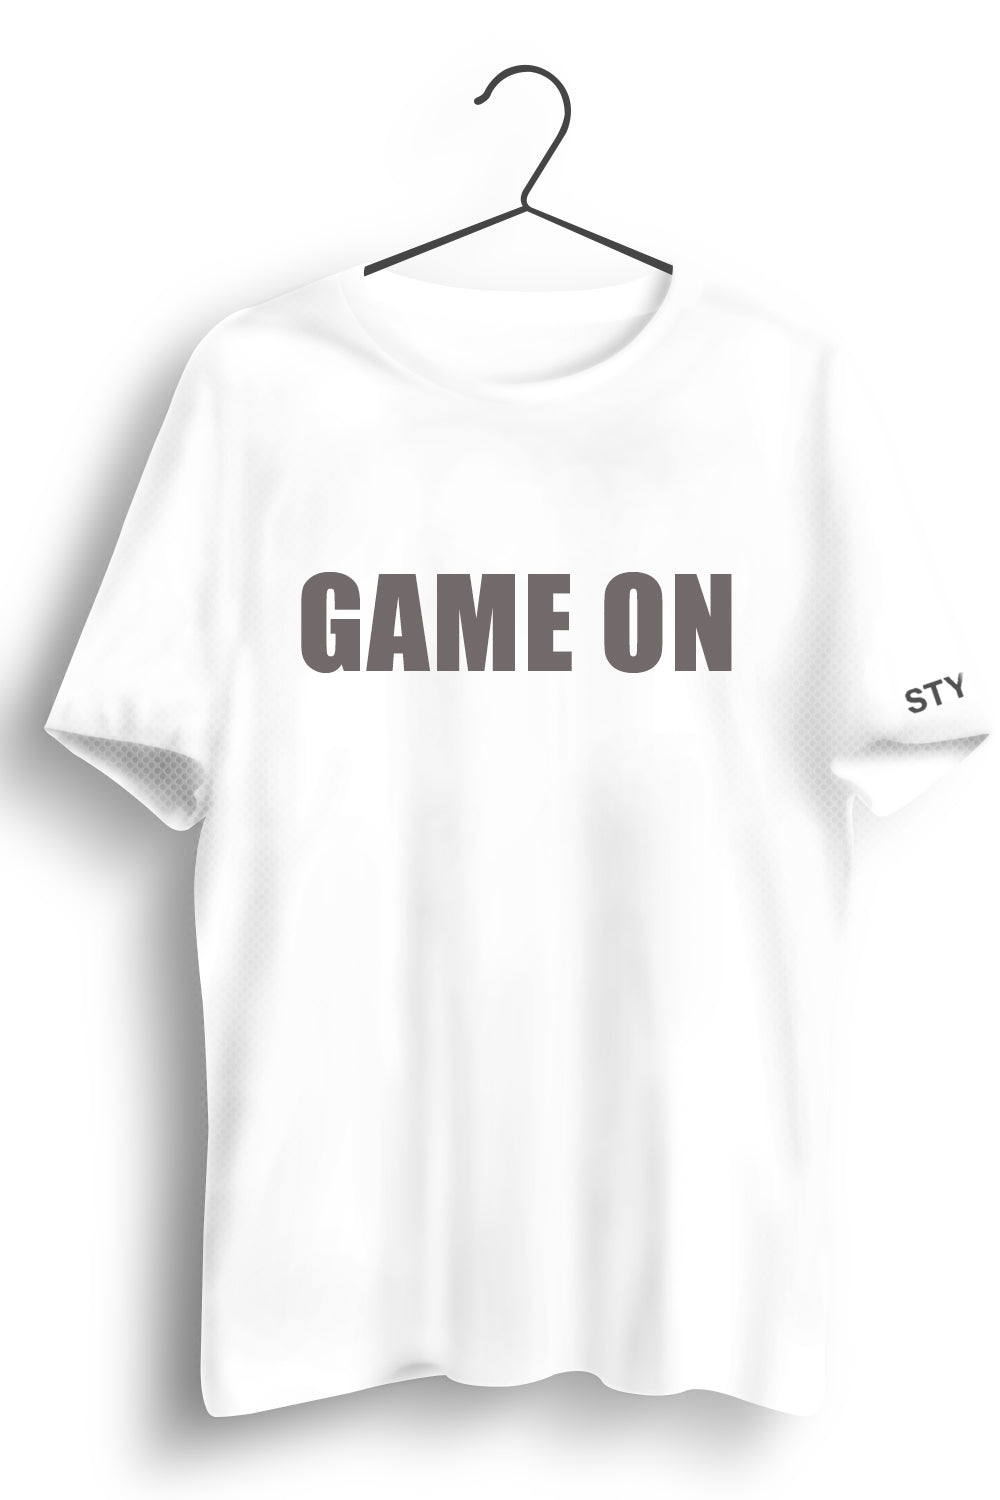 Game On Printed White Dry Fit Tee